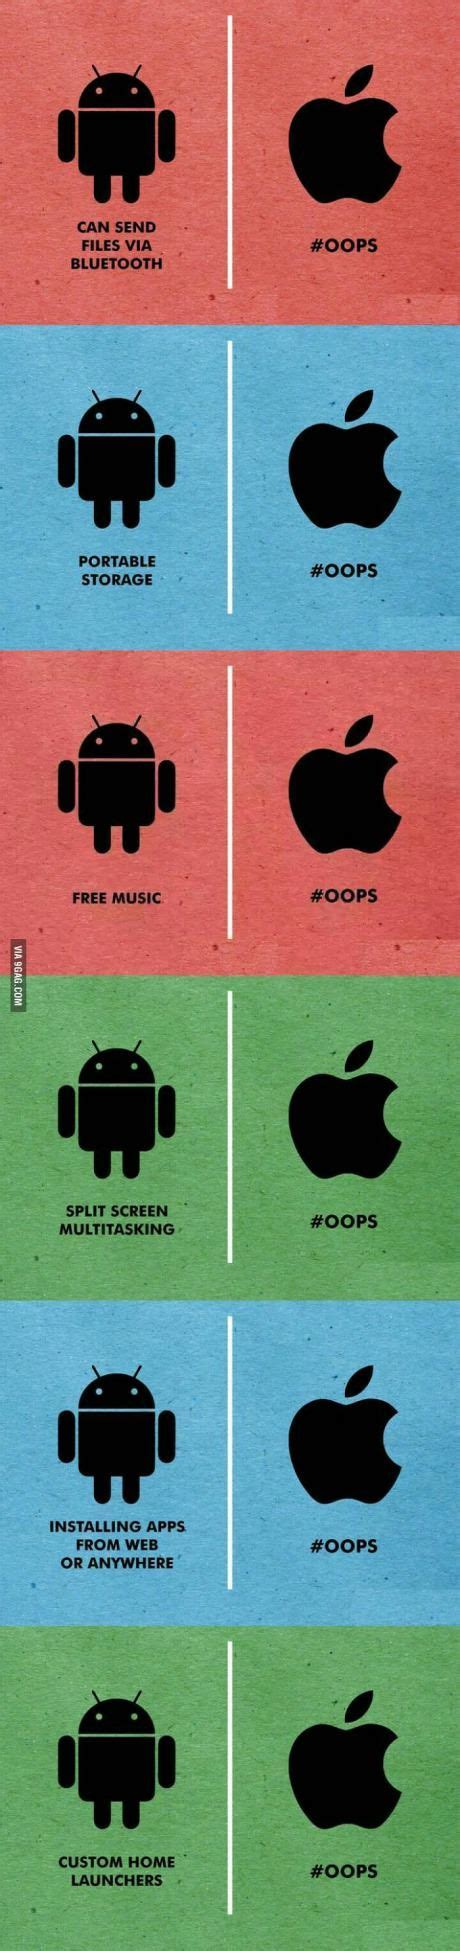 Android Vs Apple Gaming Iphone Humor Android Vs Iphone Android Meme